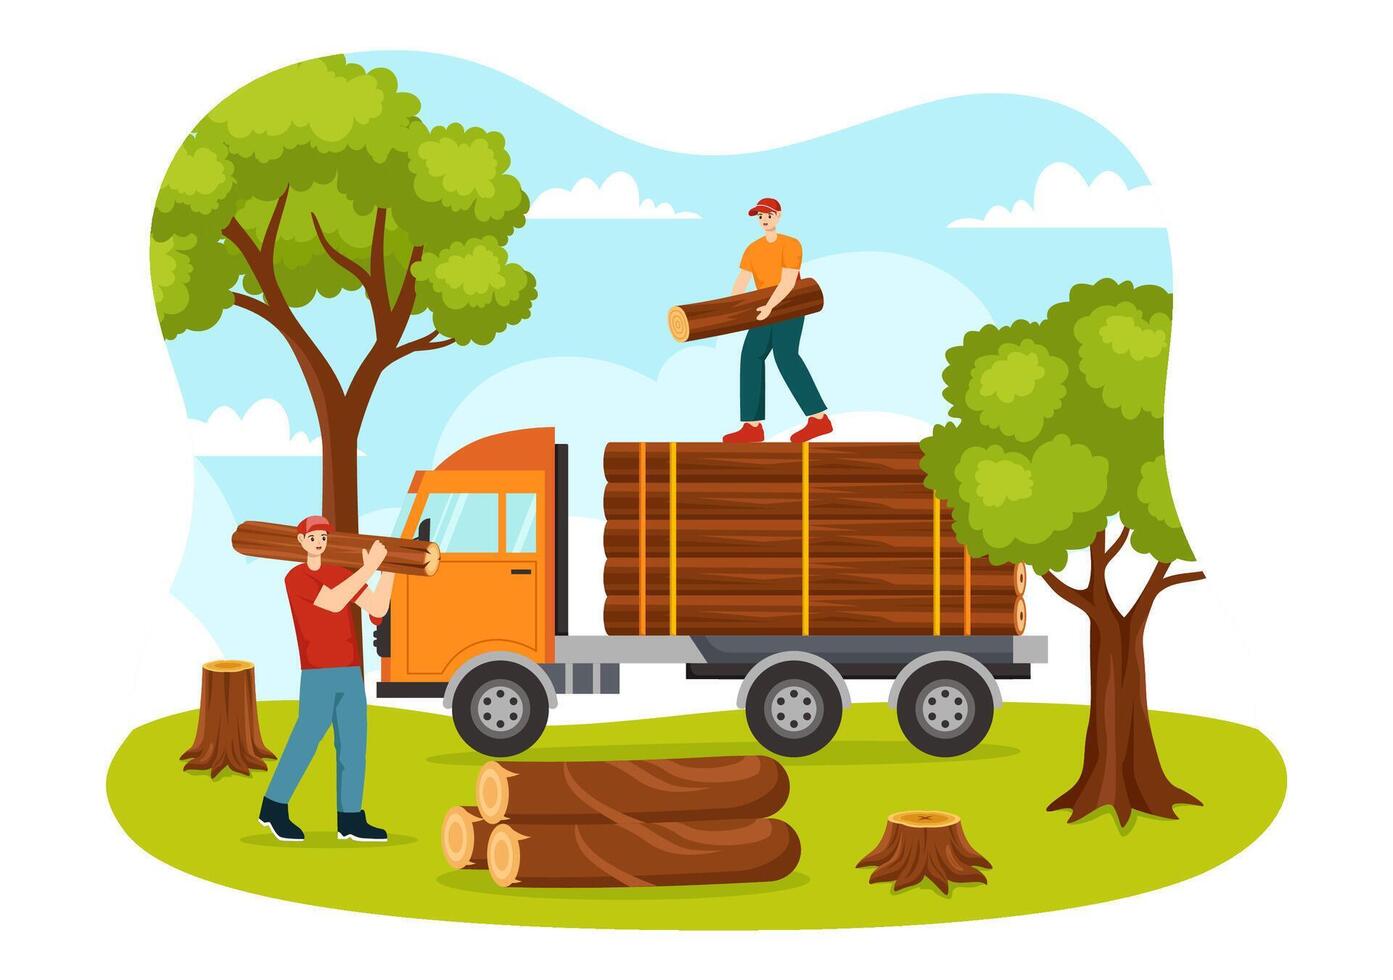 Timber Vector Illustration with Man Chopping Wood and Tree with Lumberjack Work Equipment Machinery or Chainsaw at Forest in Flat Cartoon Background